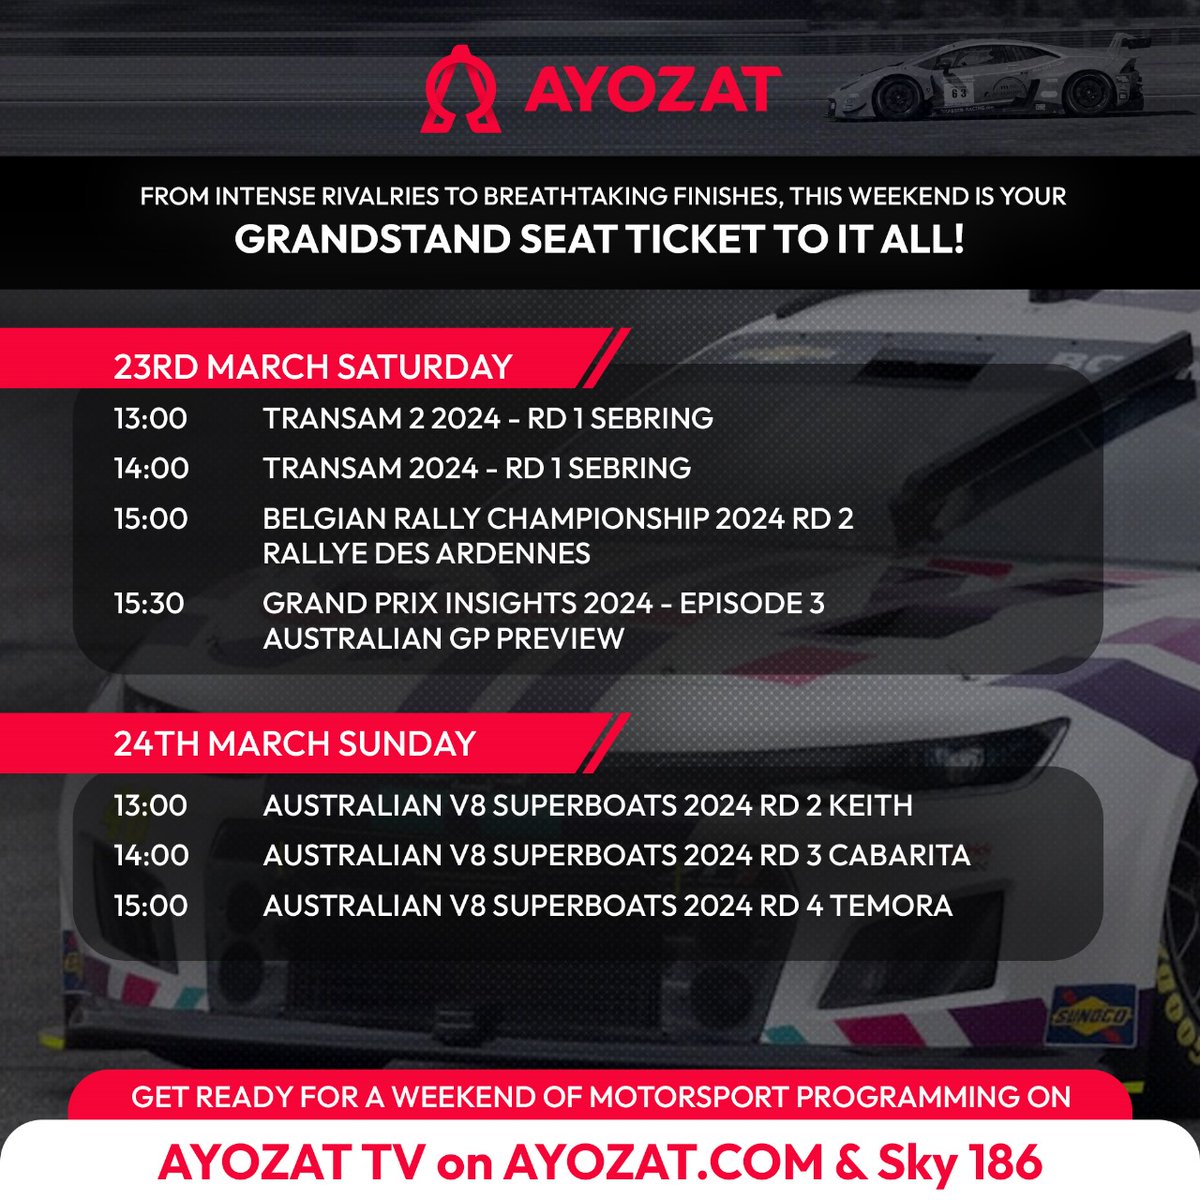 Get ready to rev your engines! Join us this weekend starting at 1 PM on AYOZAT TV at ayozat.com and Sky 186 for an adrenaline-packed lineup of motorsport action!
#motorsport #cars #racing #action #weekendracing